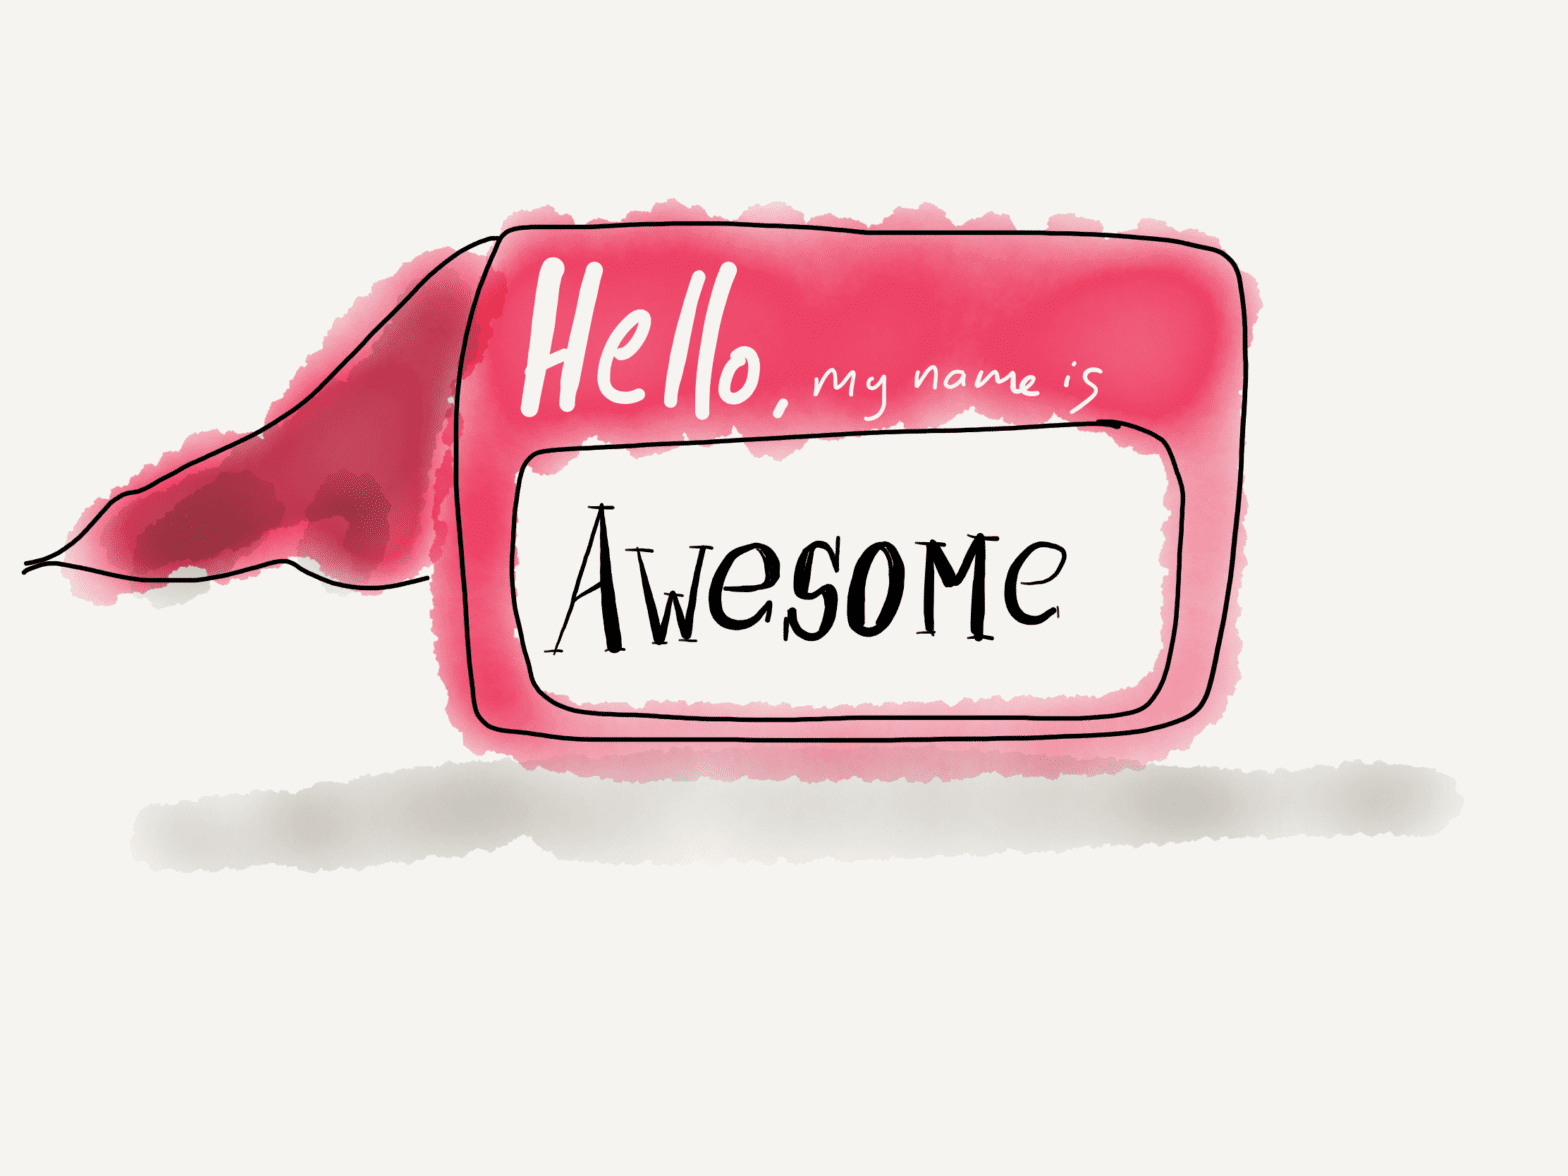 Hello my name is awesome book summary hero image